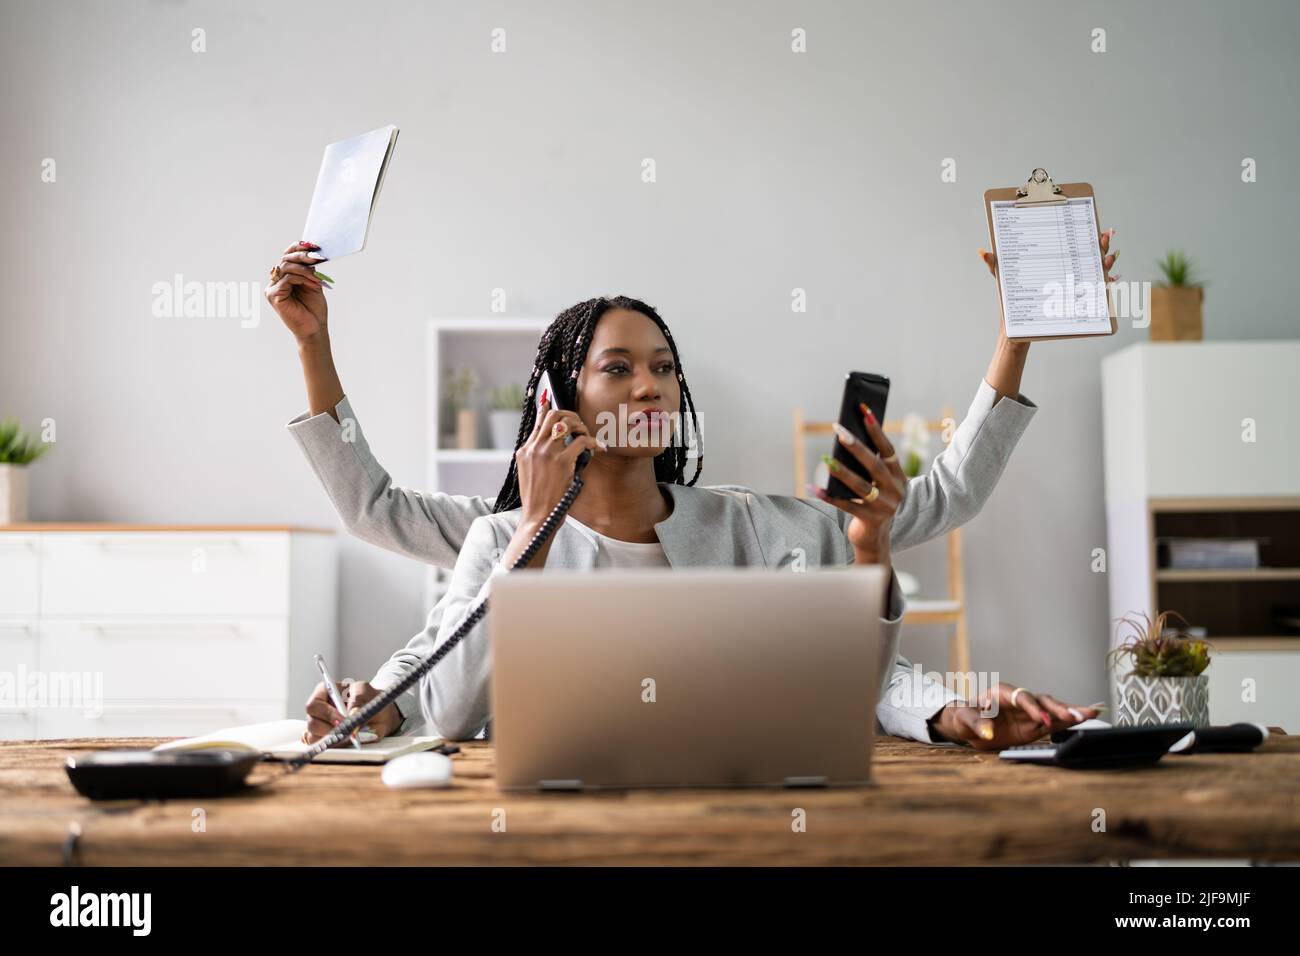 Smiling Young Businesswoman Doing Multitasking Work At Workplace Stock Photo